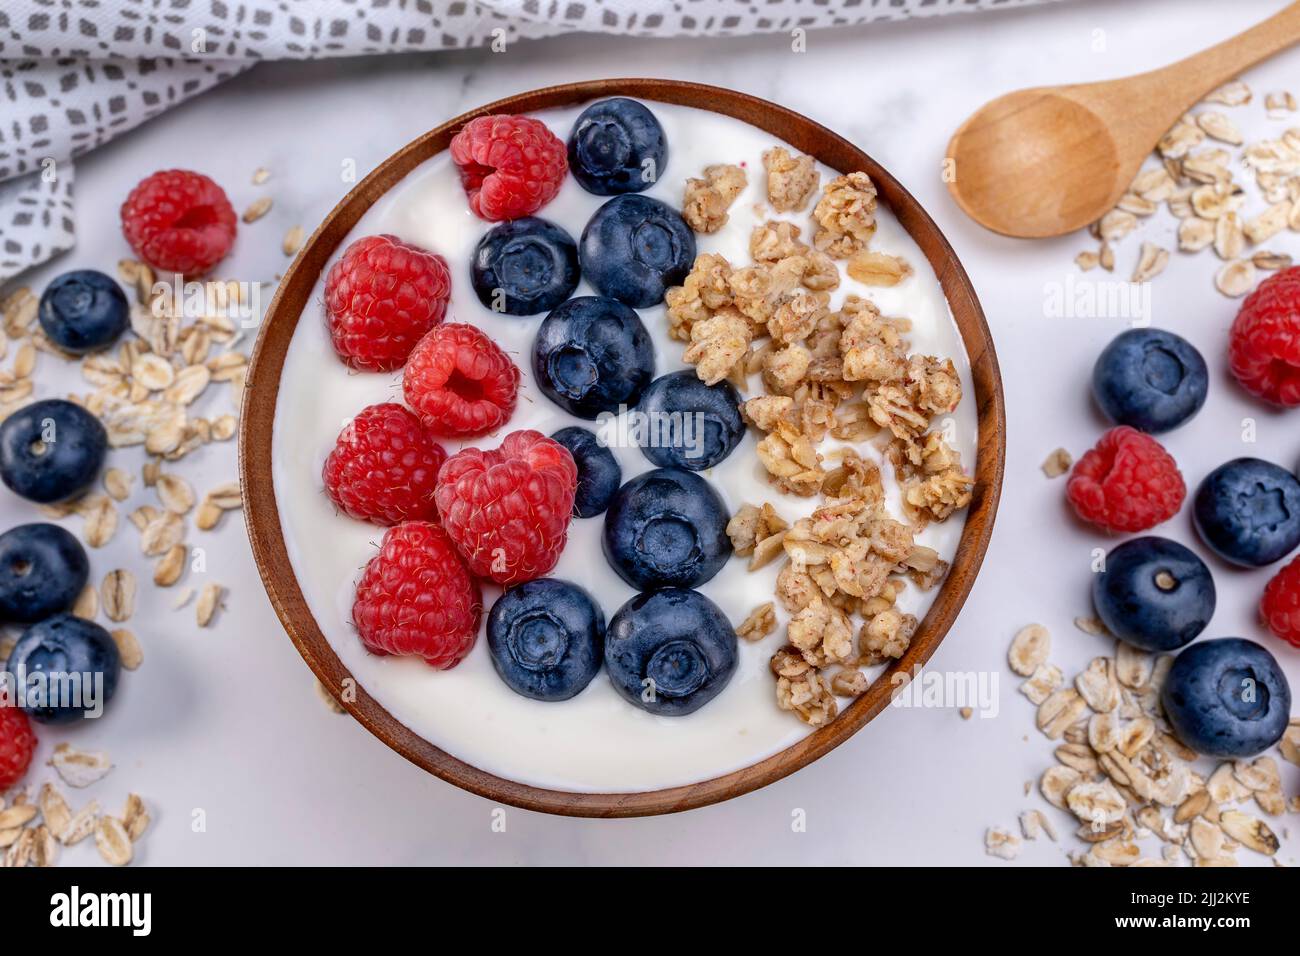 Serving a portion of yogurt with blueberry raspberry and oat flakes in a wooden bowl ready to be served. Healthy food for dieting concept. Fruit muesl Stock Photo